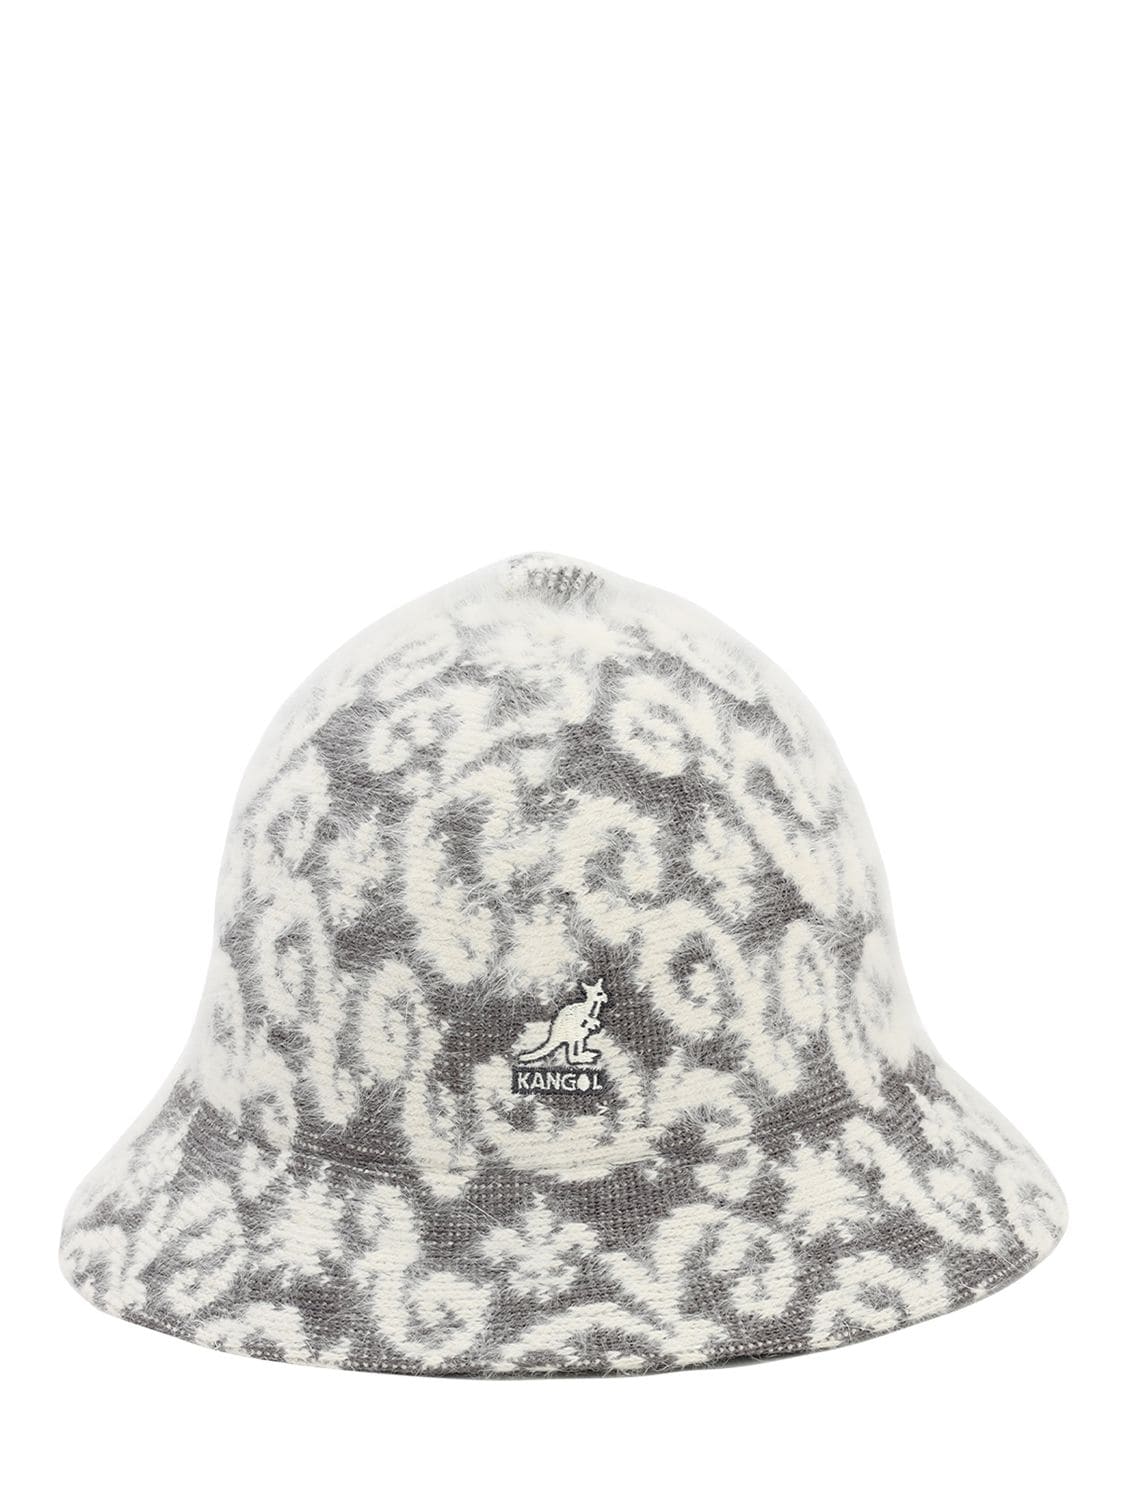 Kangol “baroque Tapestry Casual”帽子 In White